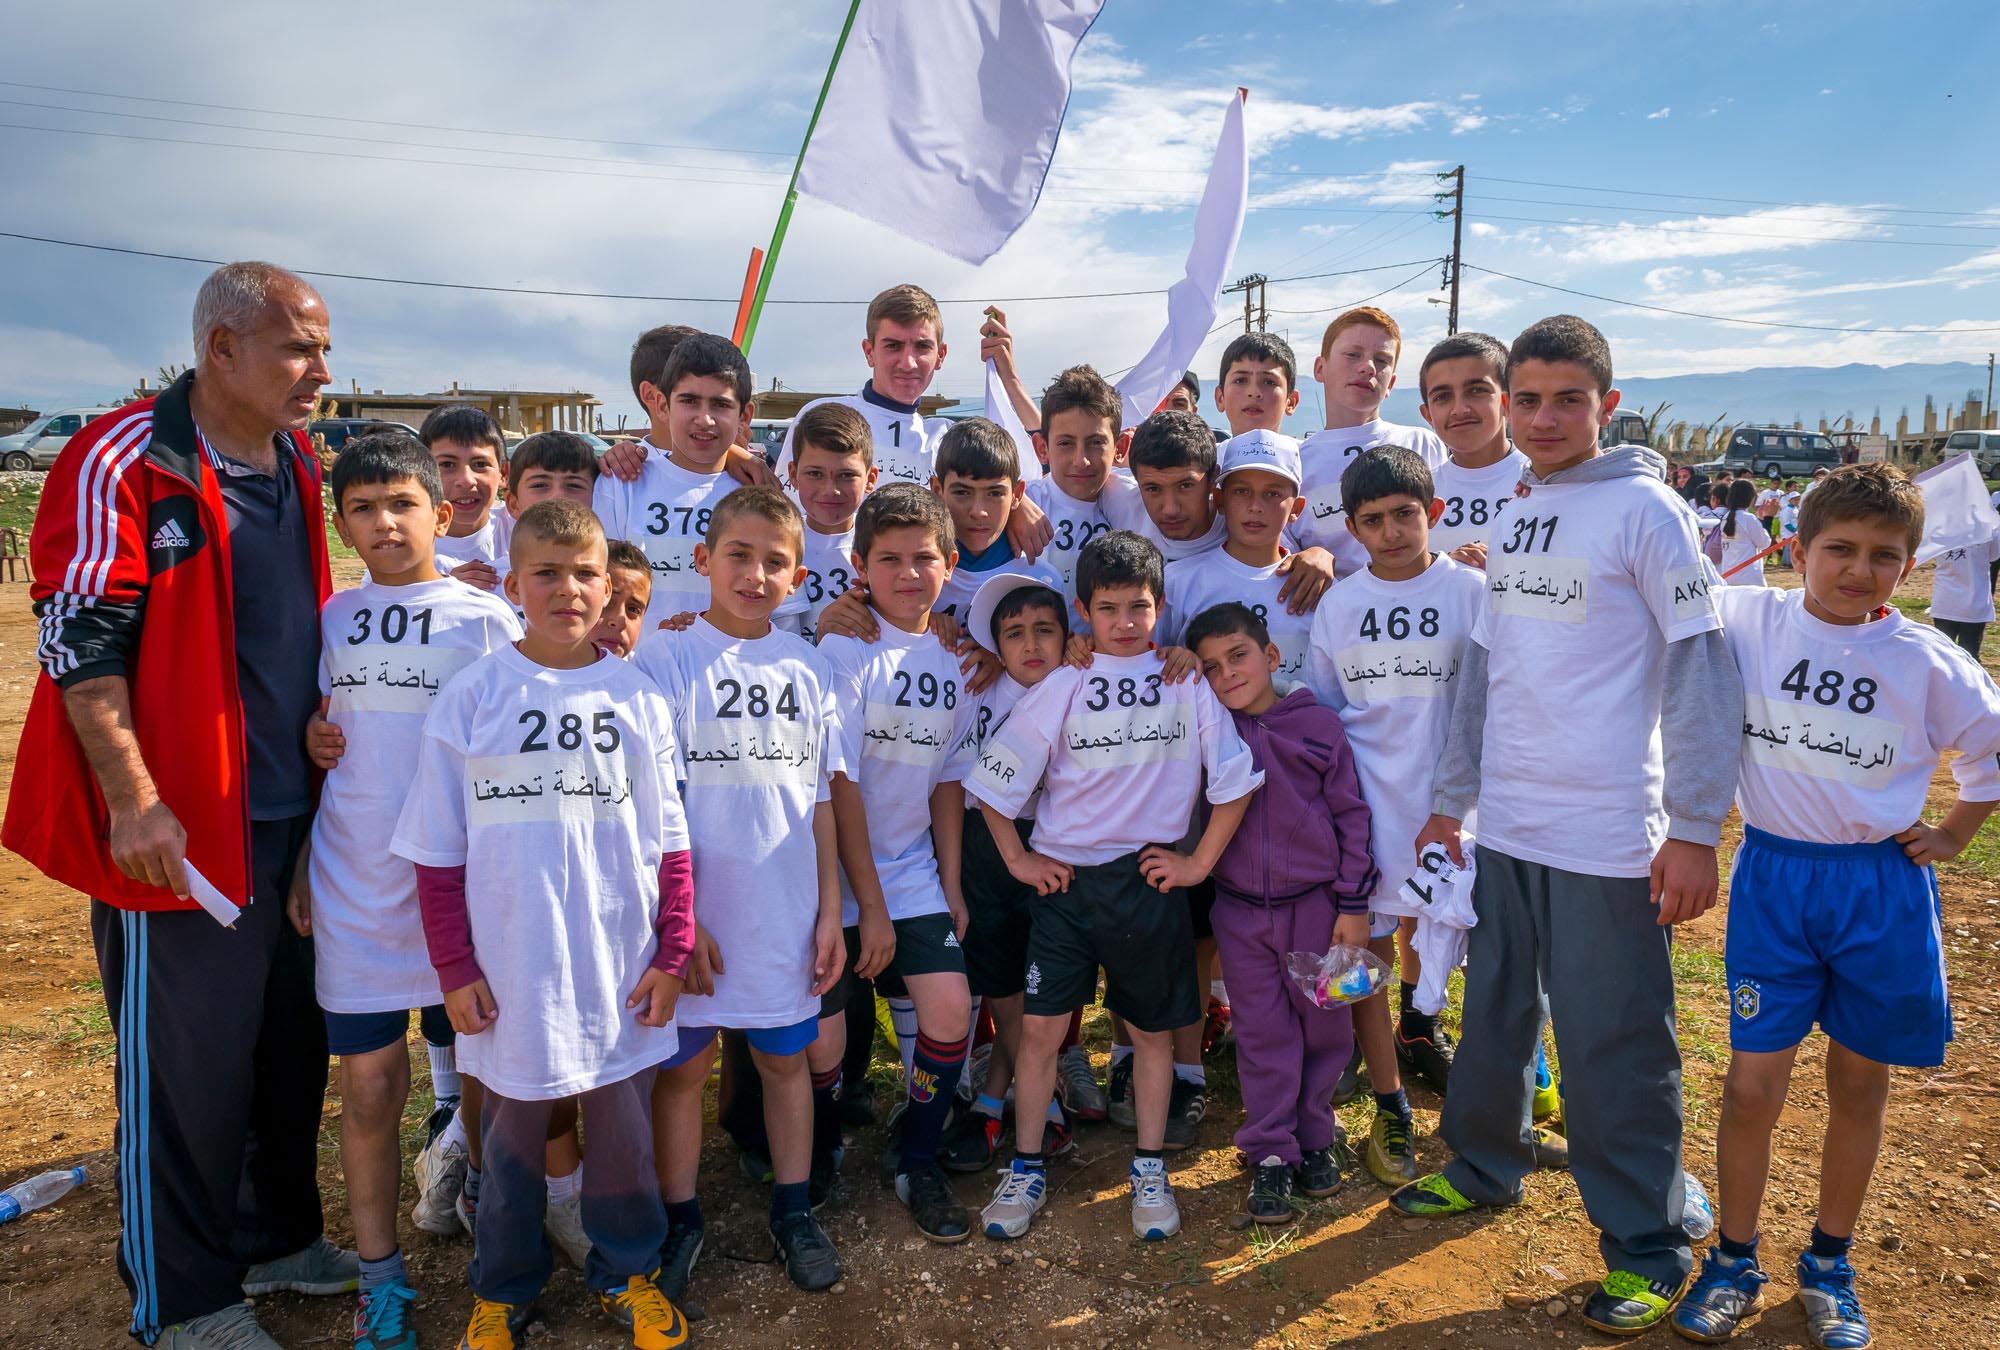 One of the 28 sporting clubs in front of the start line at Anera's mini-marathon in Akkar, northern Lebanon.